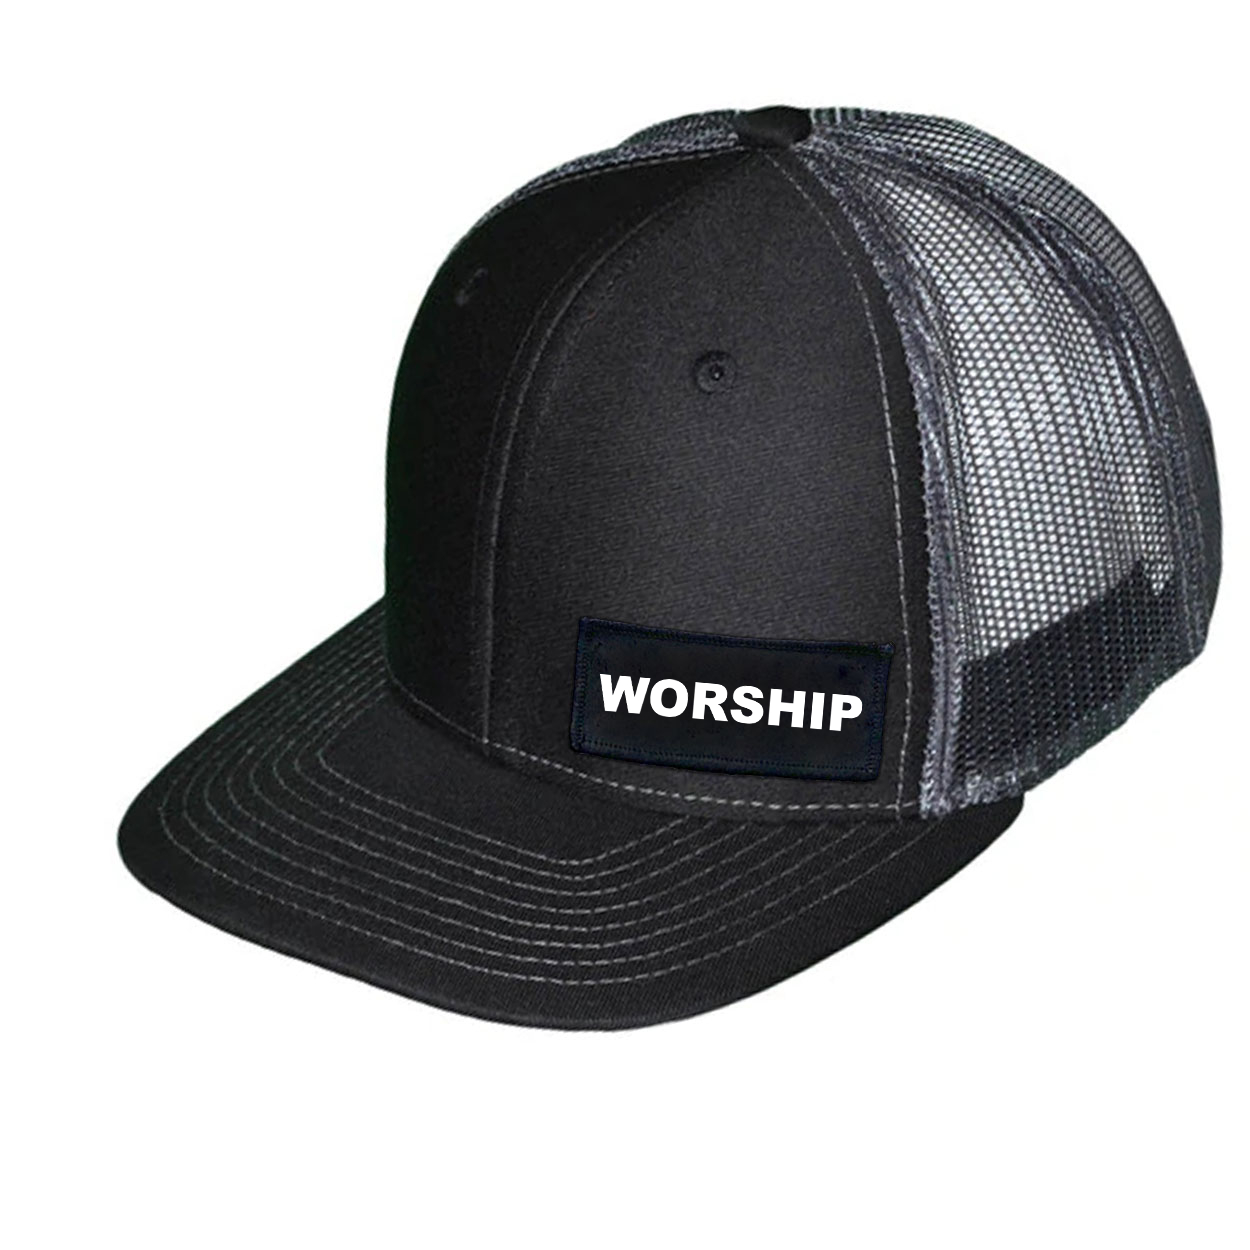 Worship Brand Logo Night Out Woven Patch Snapback Trucker Hat Black/Gray